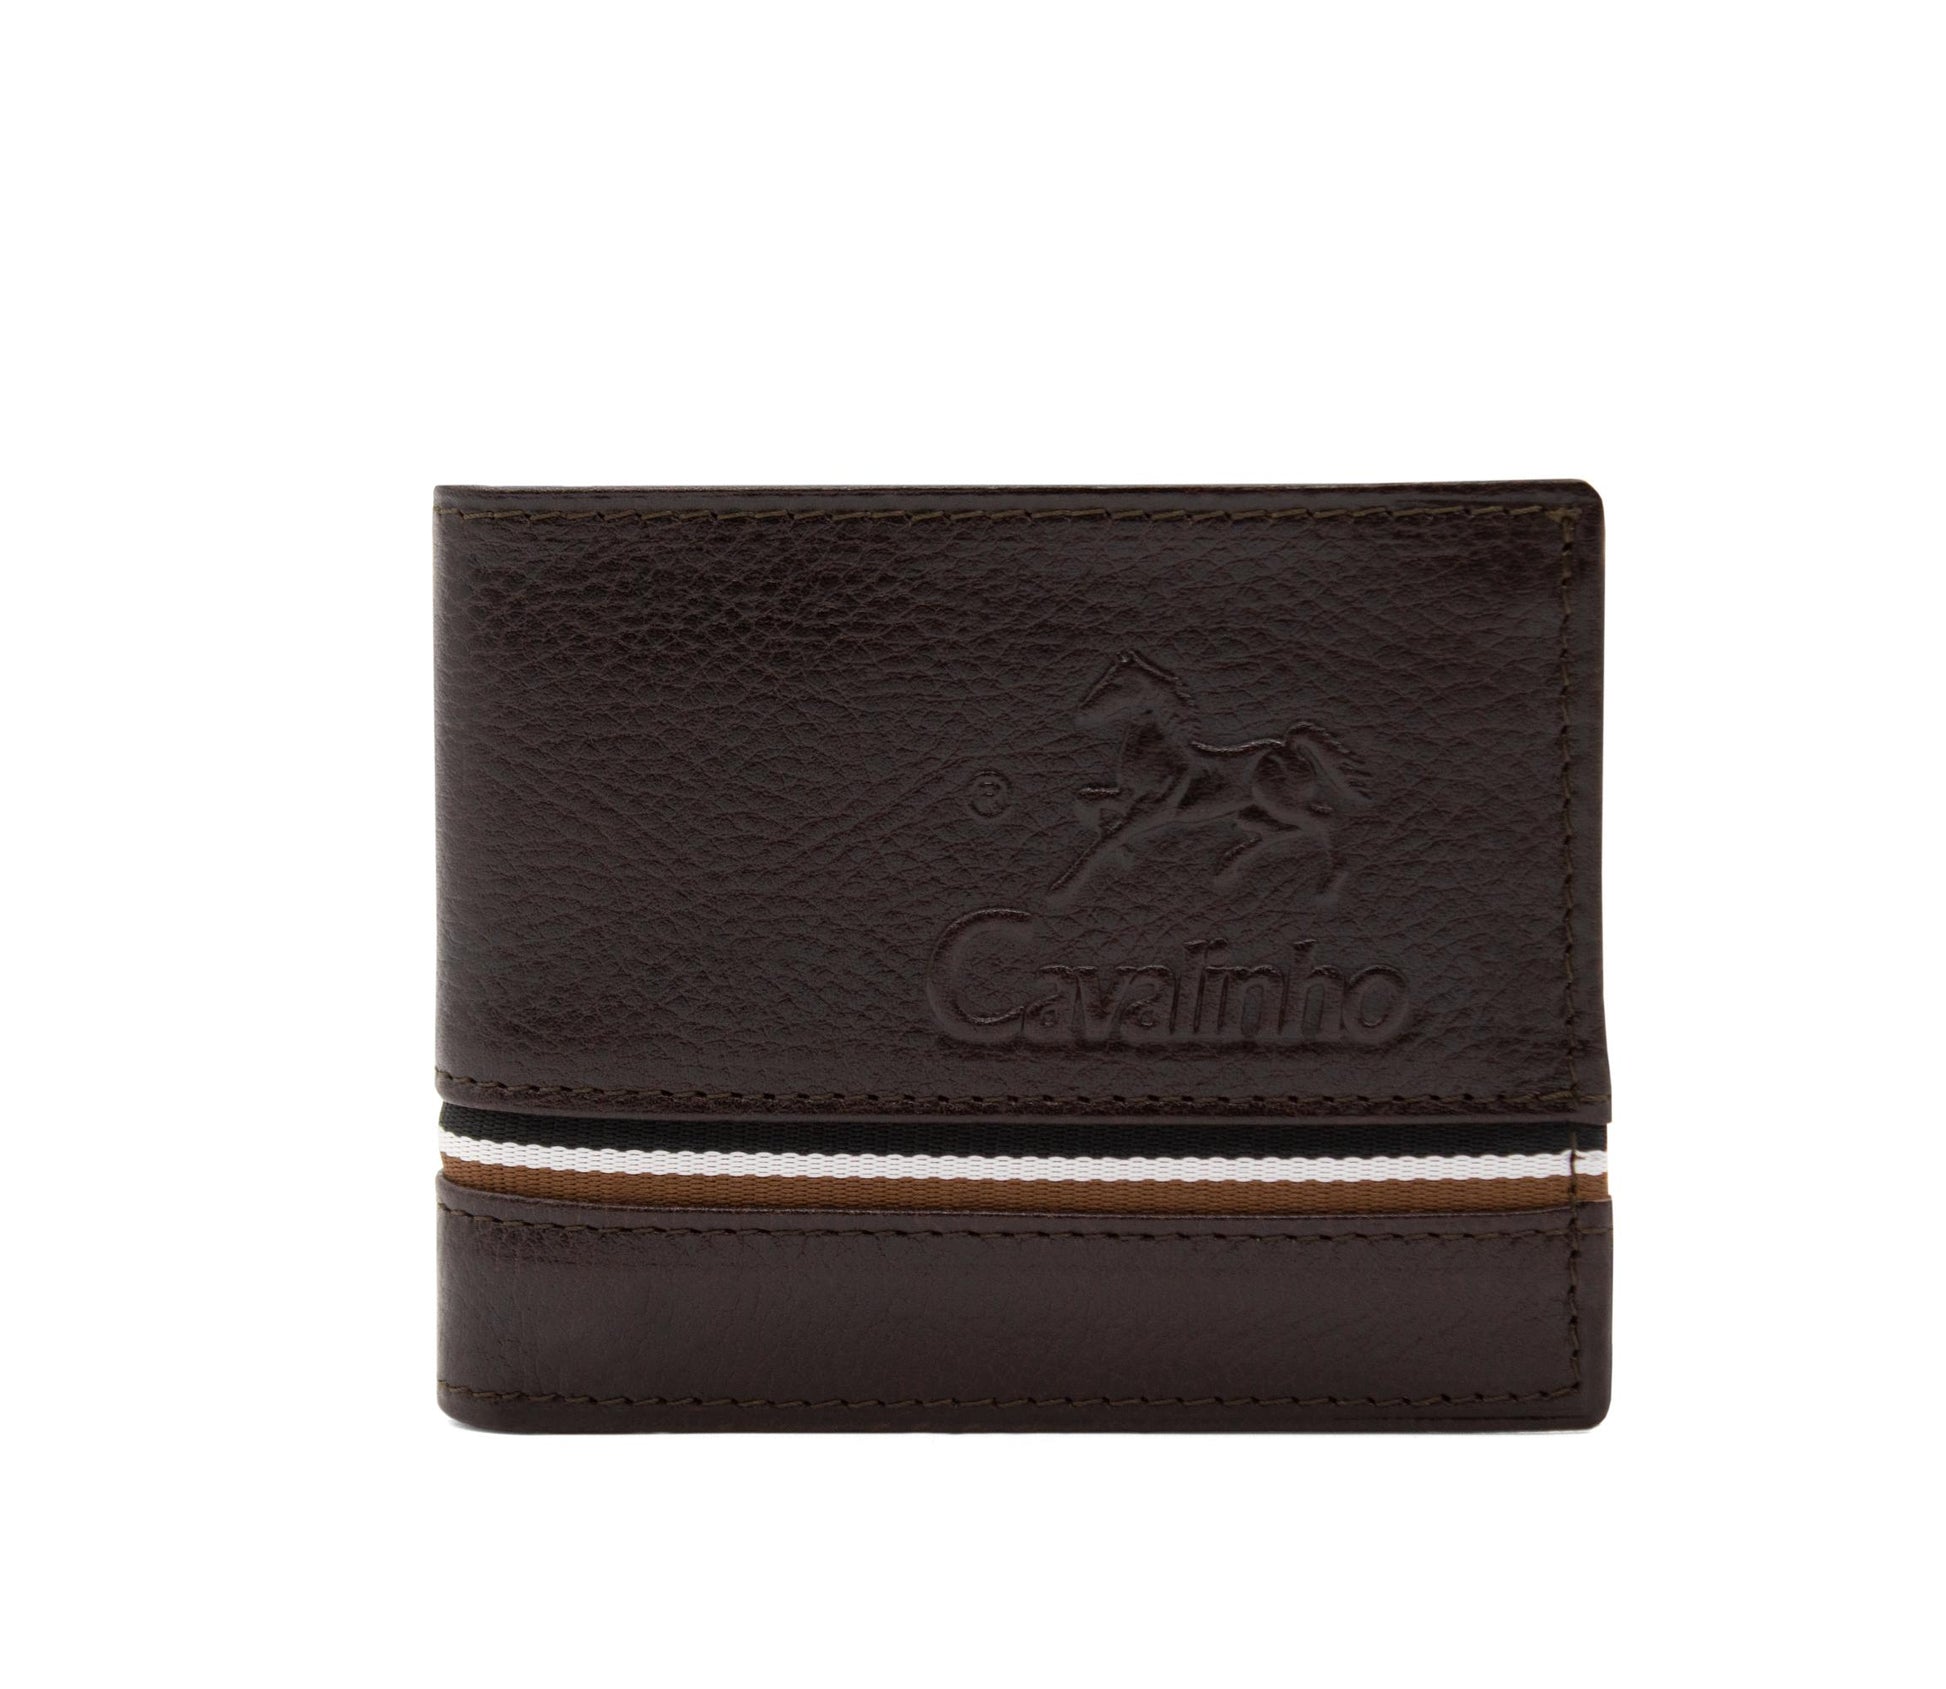 #color_ Brown | Cavalinho The Sailor Trifold Leather Wallet - Brown - 28150517.02_1